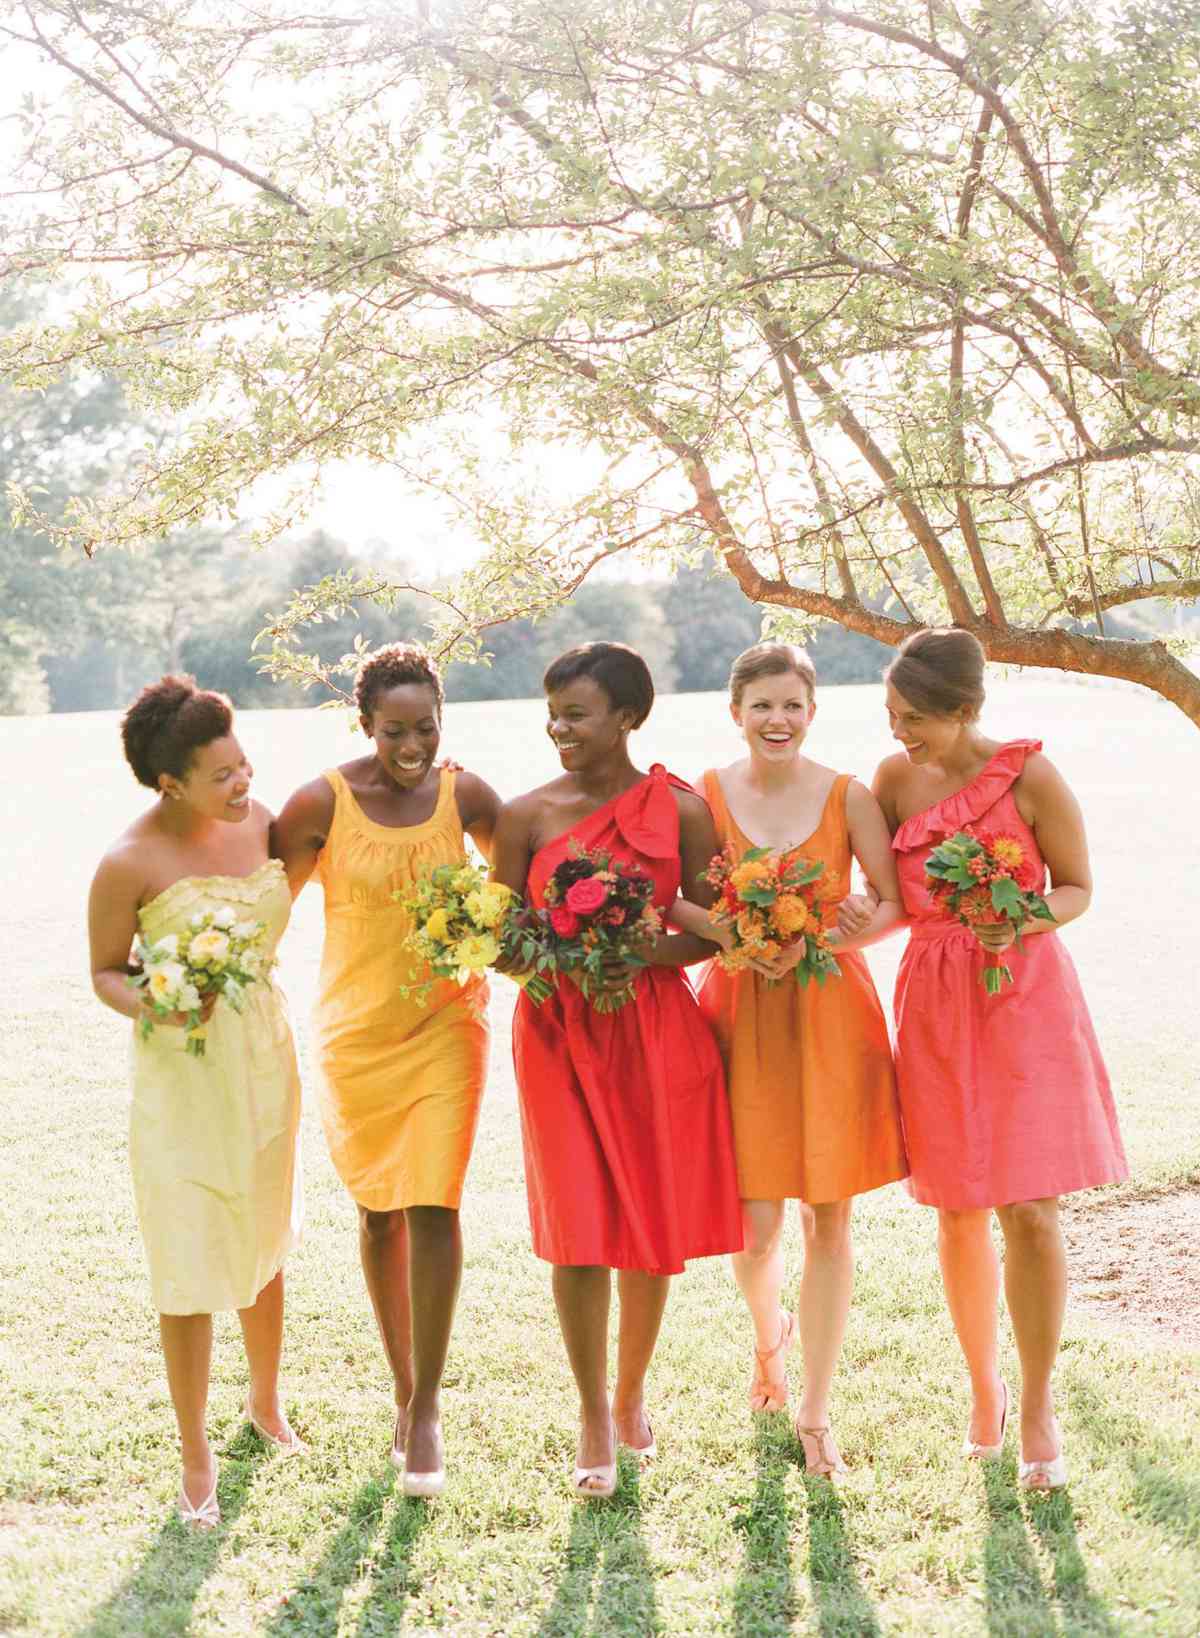 Bridesmaids' Dresses in Various Shades and Styles